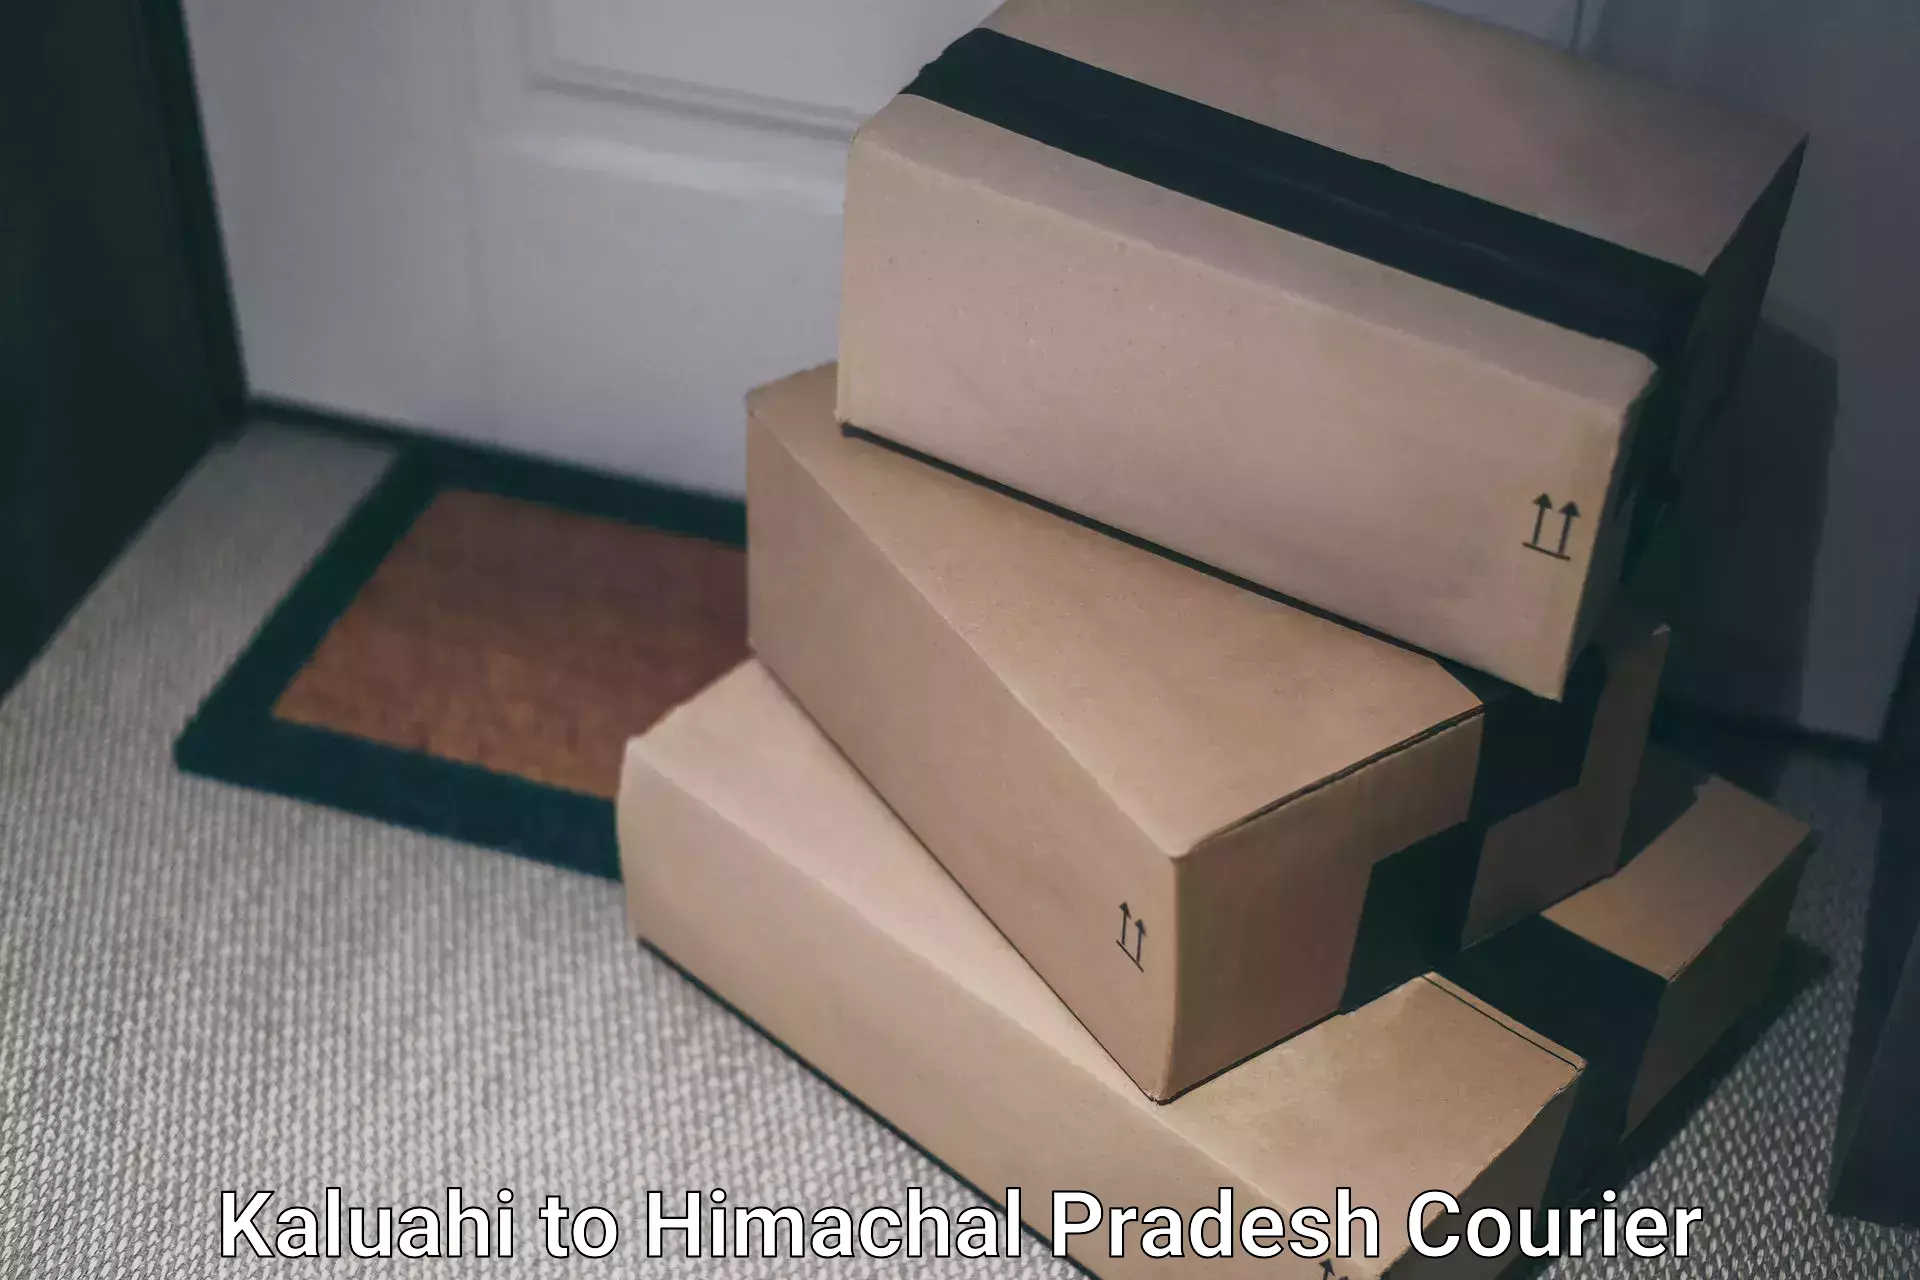 Flexible delivery schedules Kaluahi to Himachal Pradesh